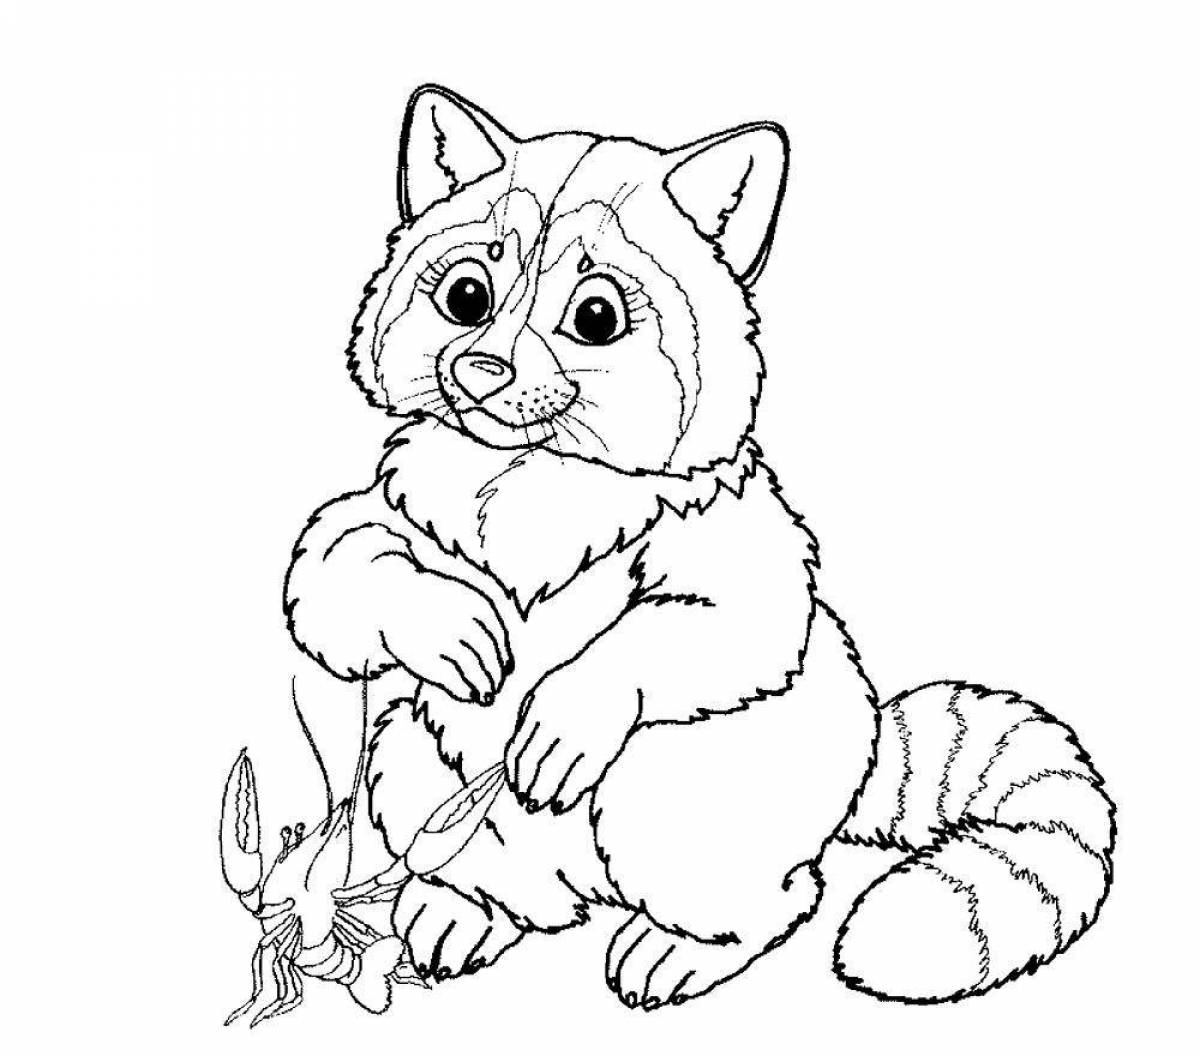 Raccoon coloring book filled with colors for kids